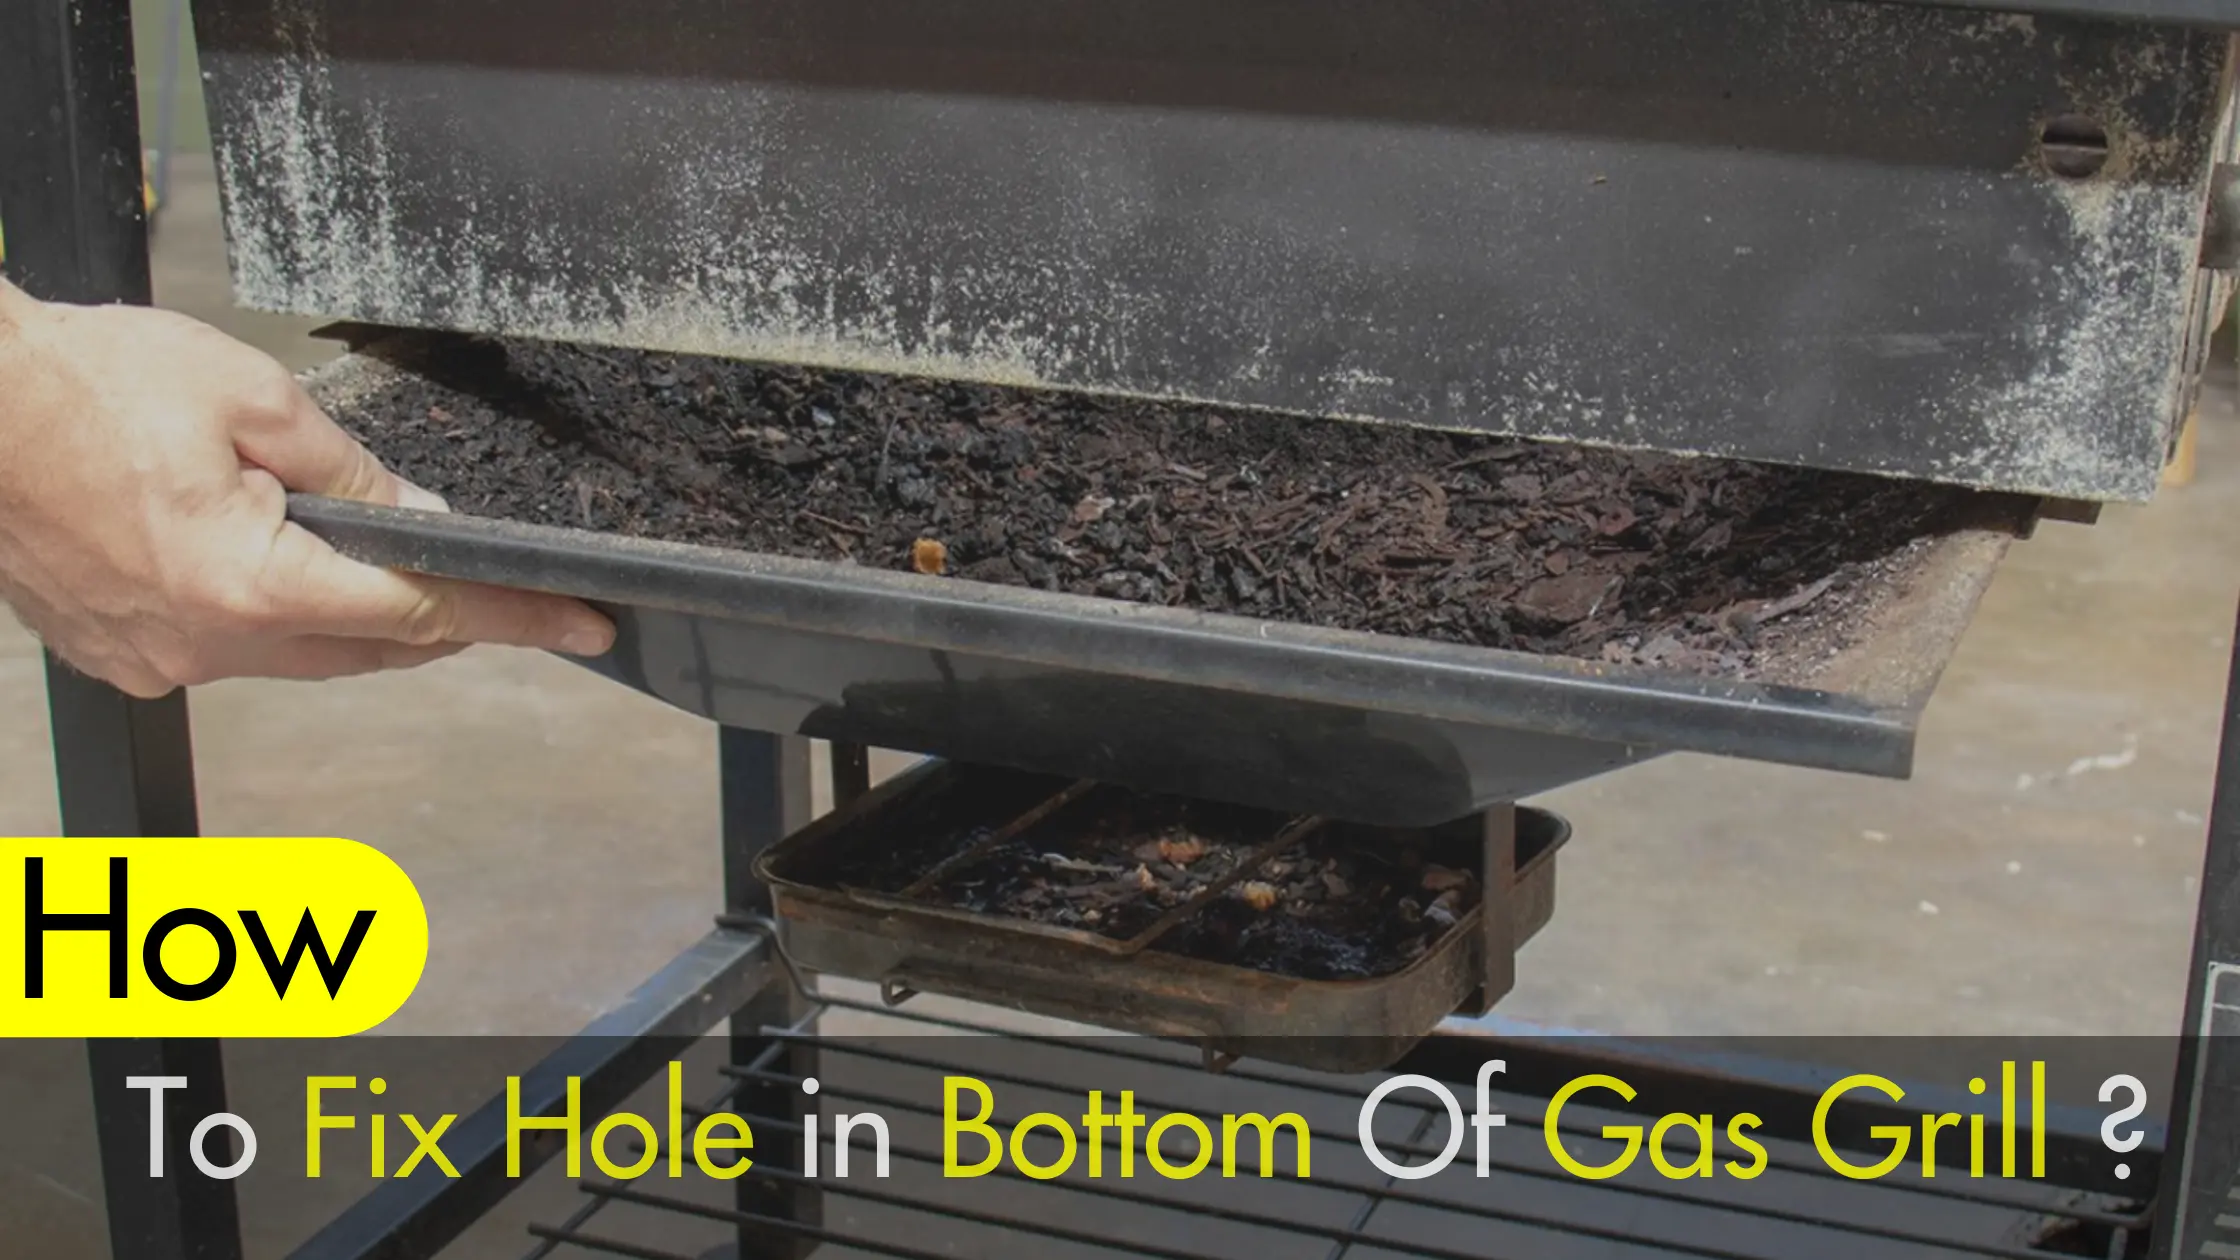 how to fix hole in bottom of gas grill